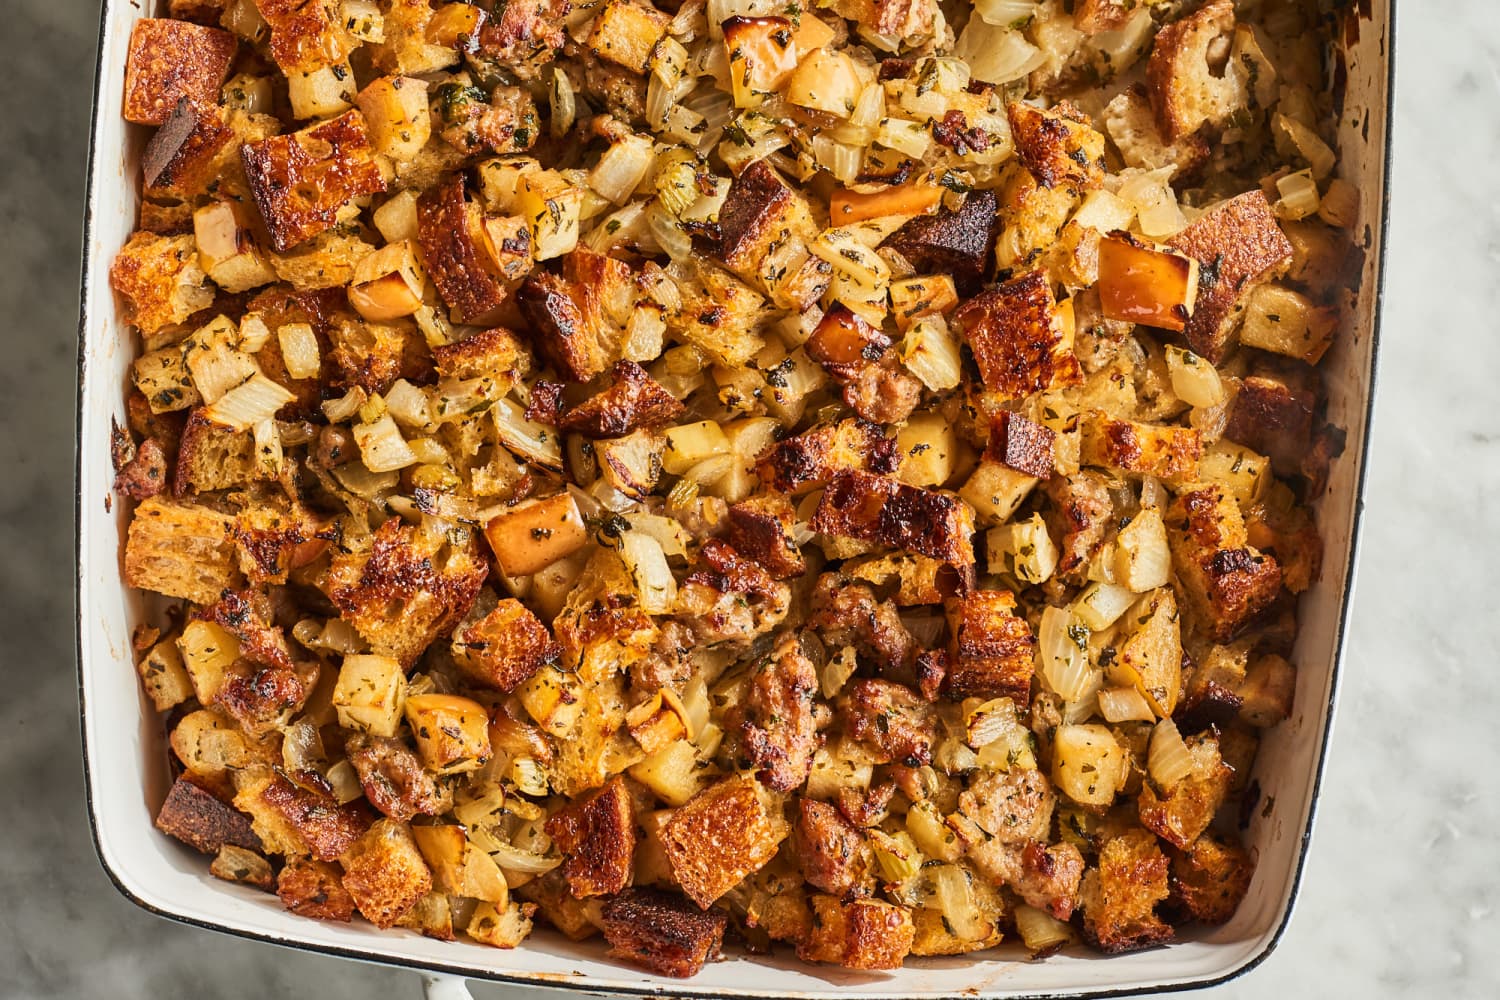 Apple Sausage Stuffing Recipe (with Make-Ahead Option) | The Kitchn